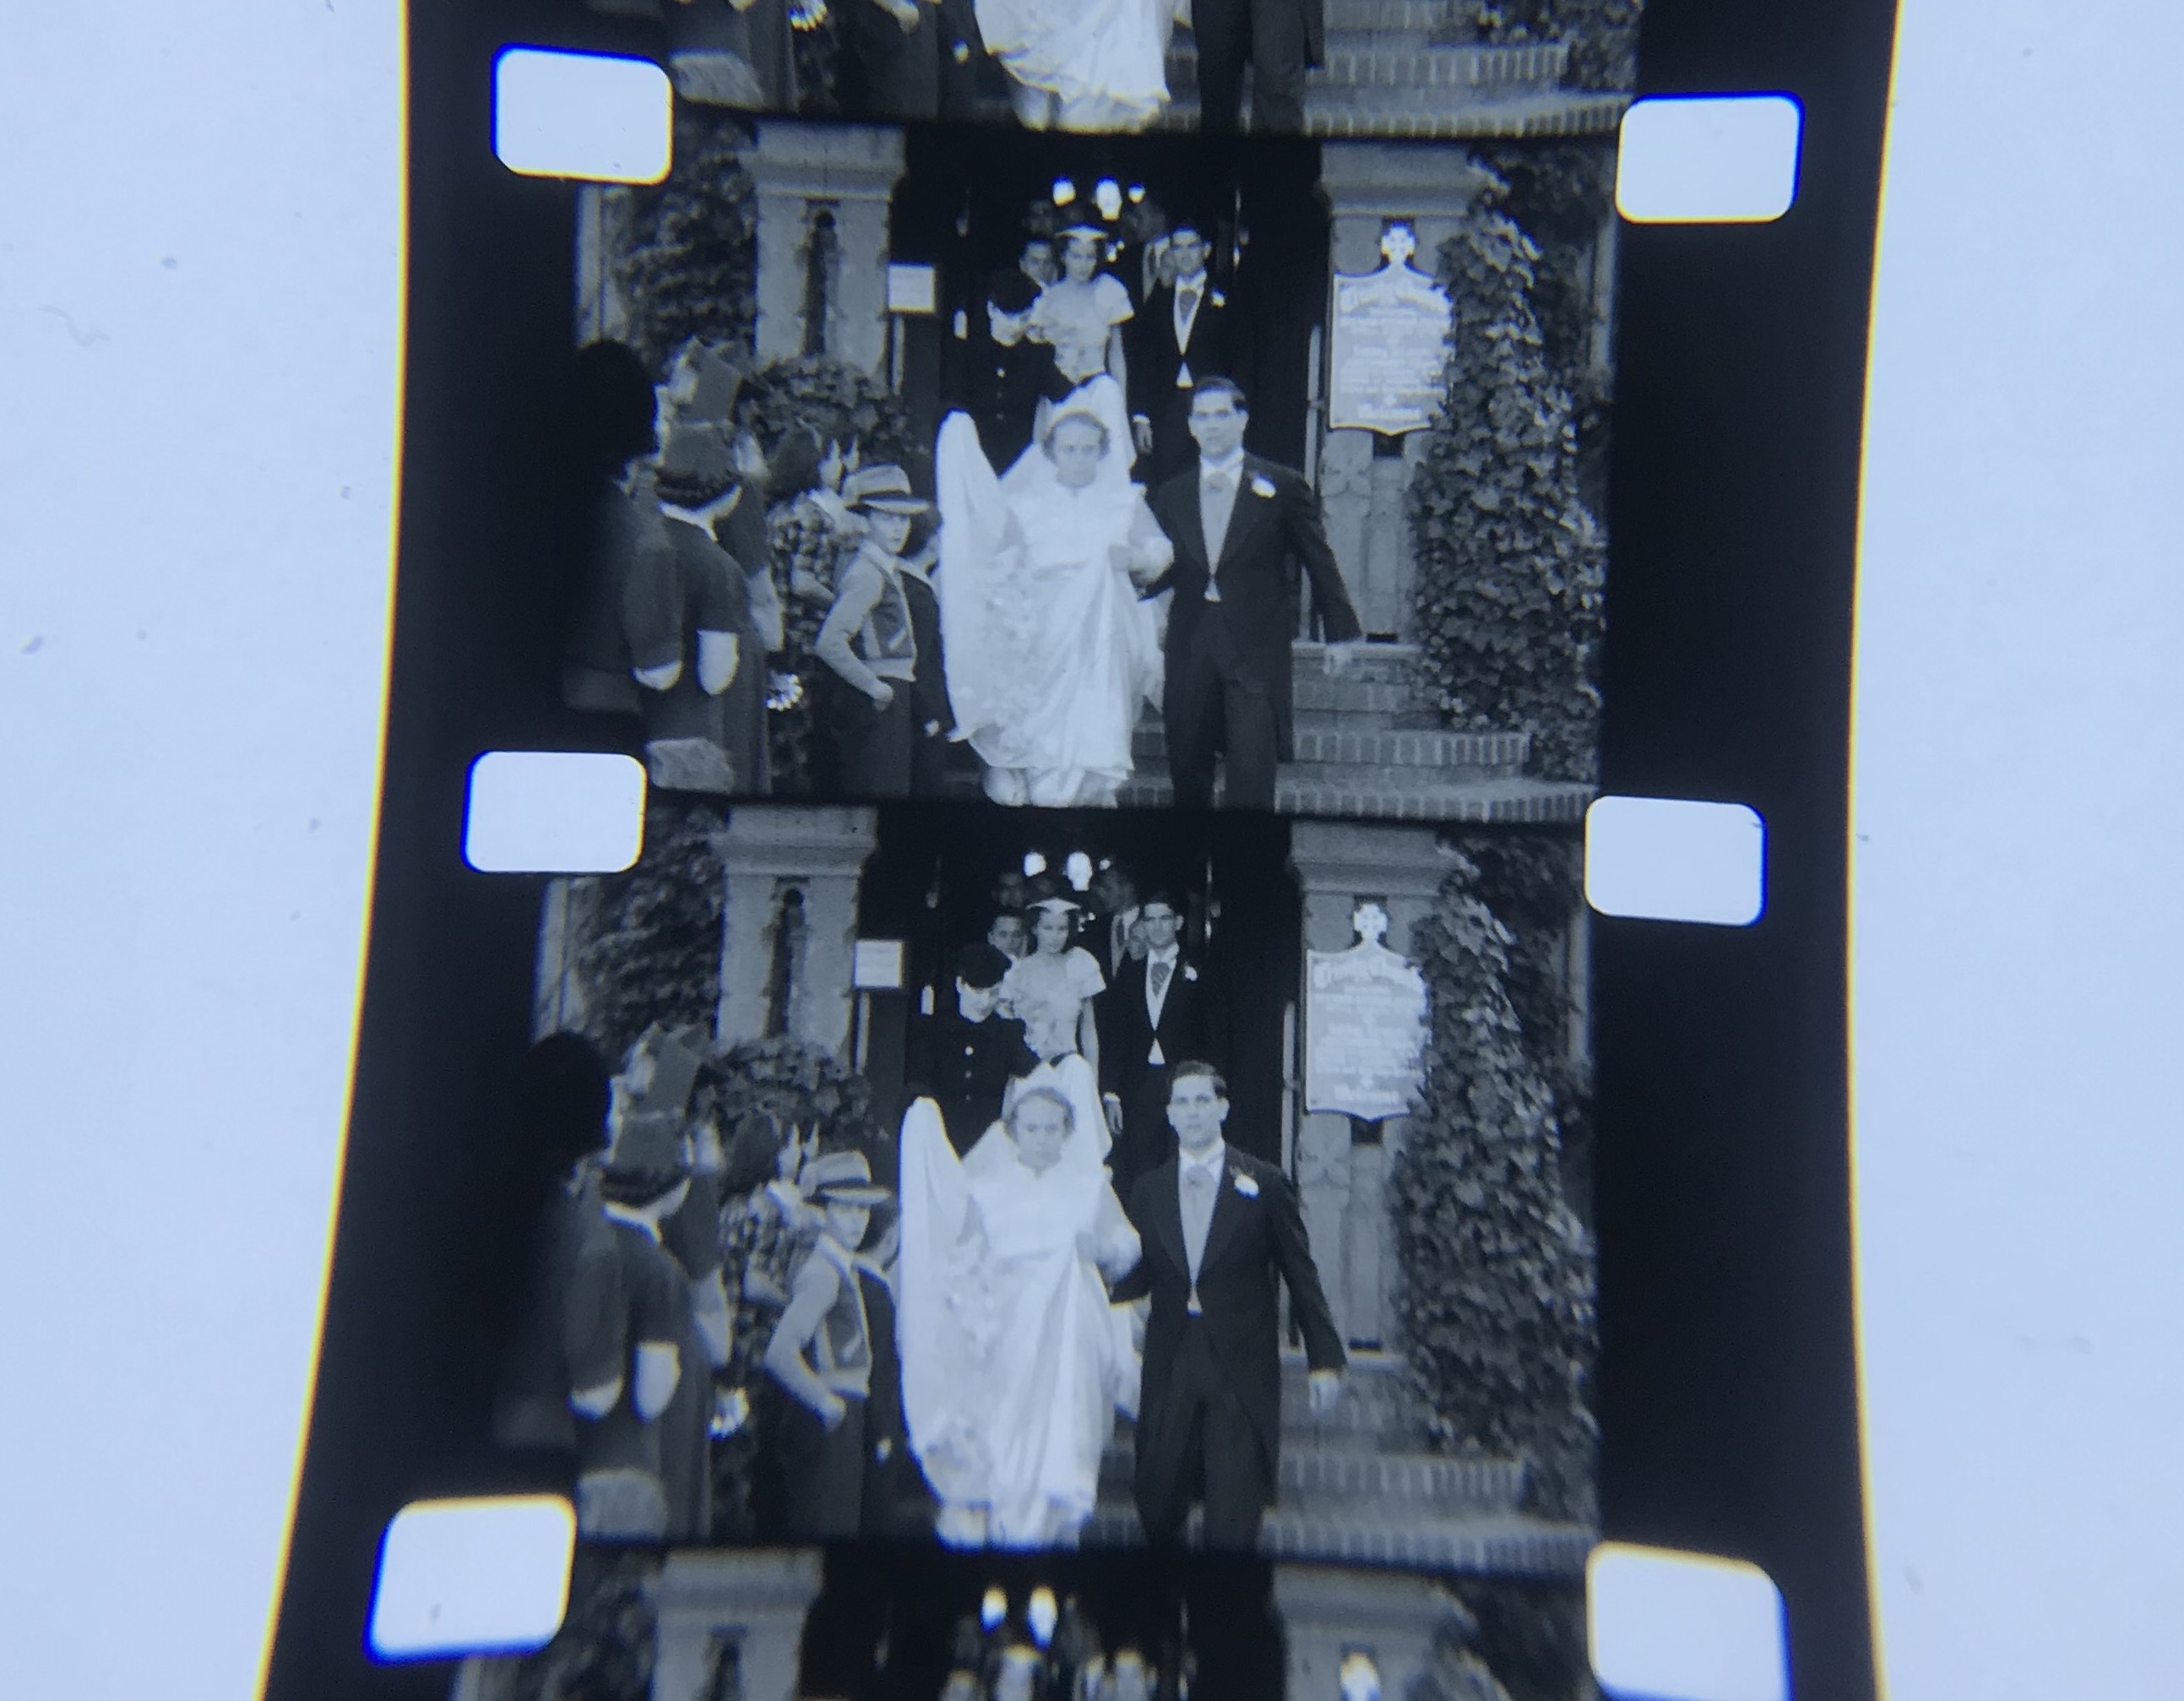 Black and white home movie of a bride and groom leaving the church. Origin of film unknown.